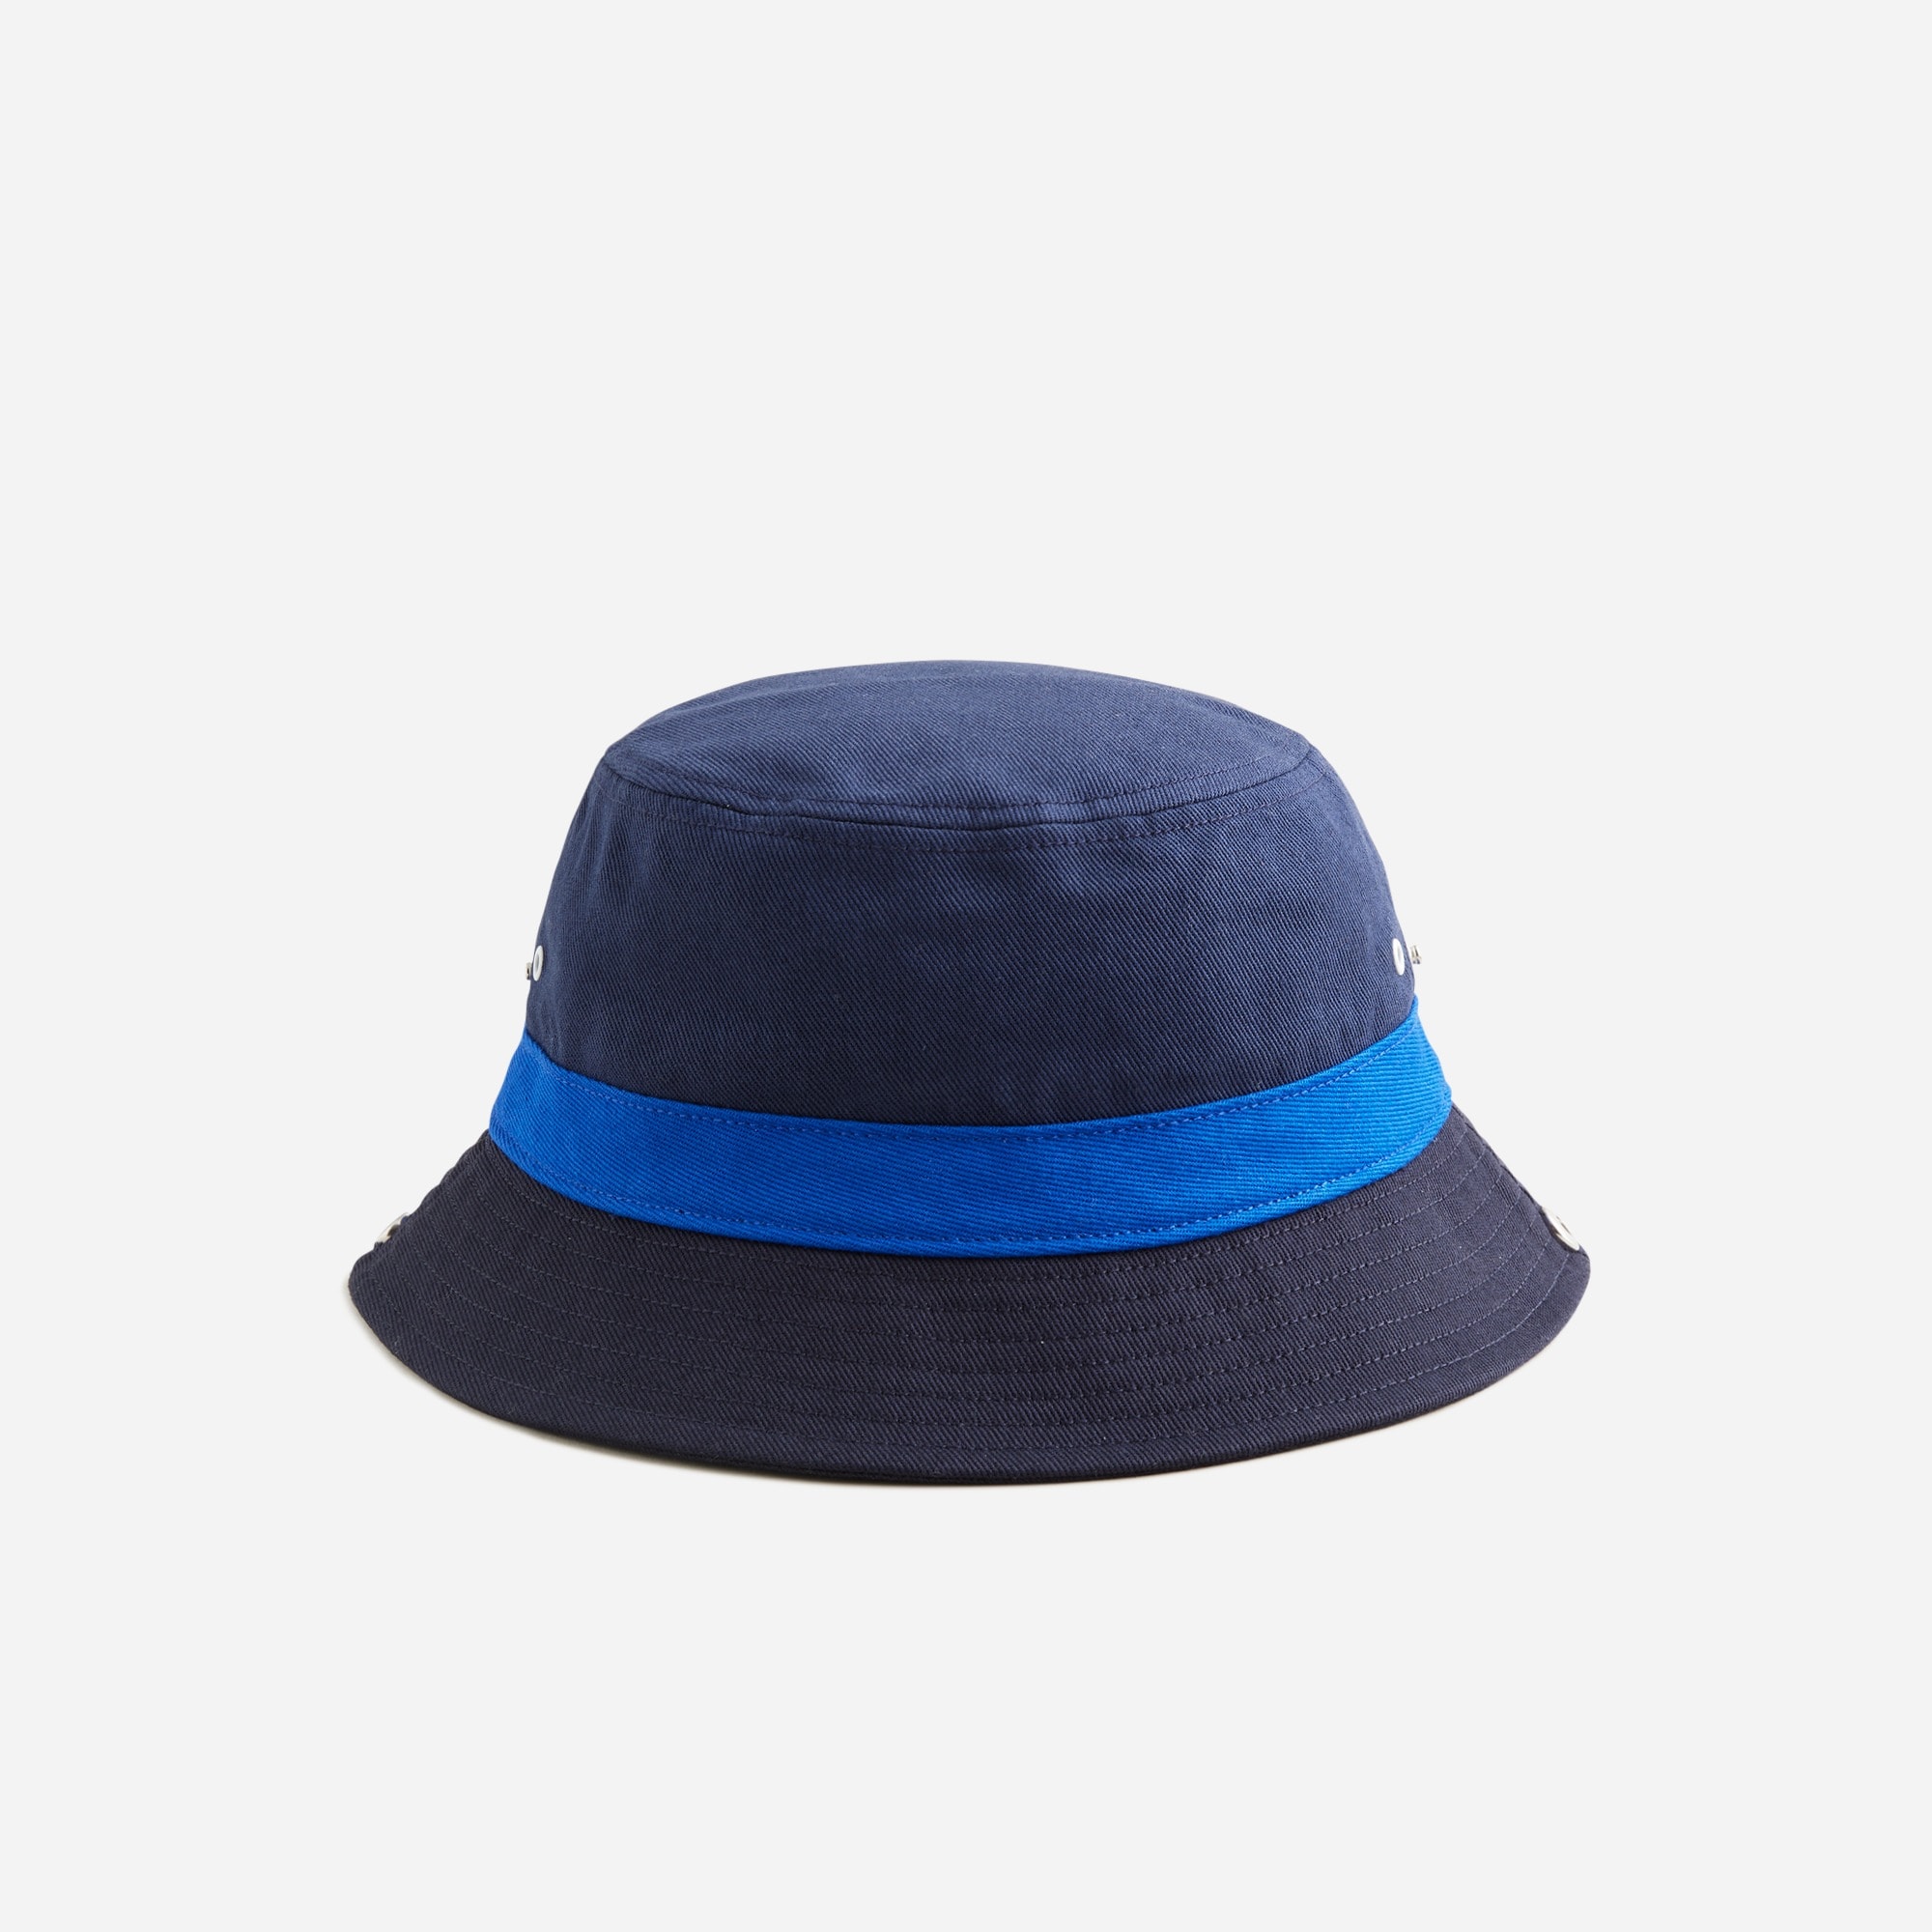 J.Crew Men's Bucket Hat with Snaps in Denim Twill (Size Large-XLarge)